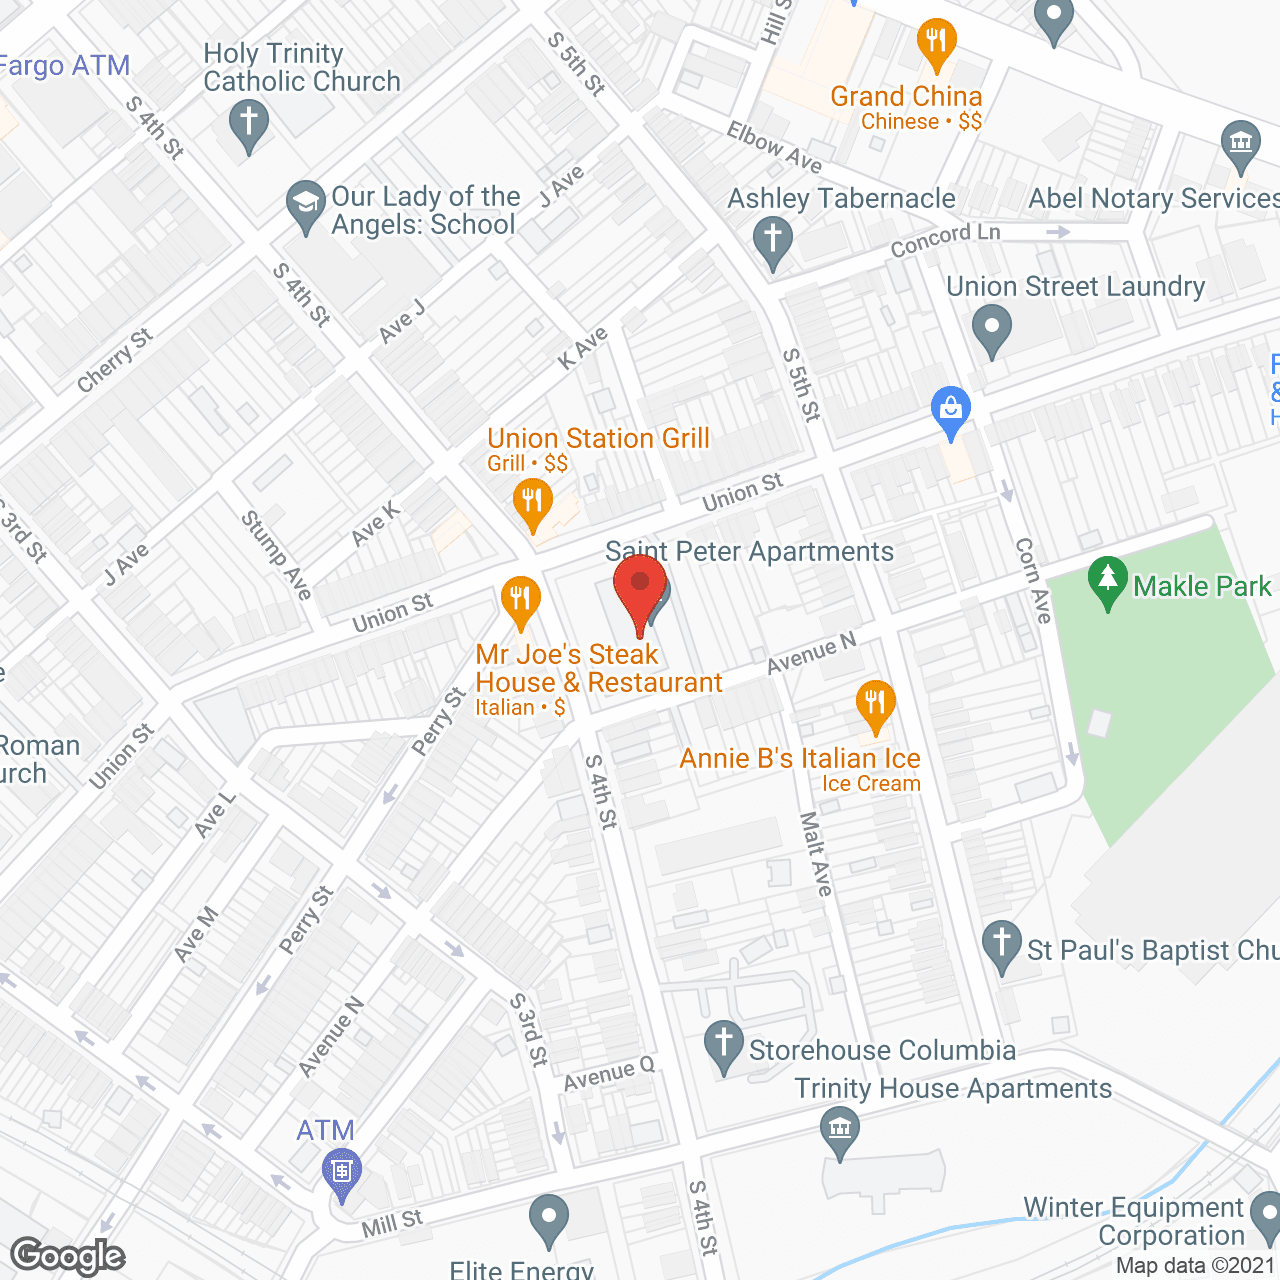 St Peter Apartments in google map